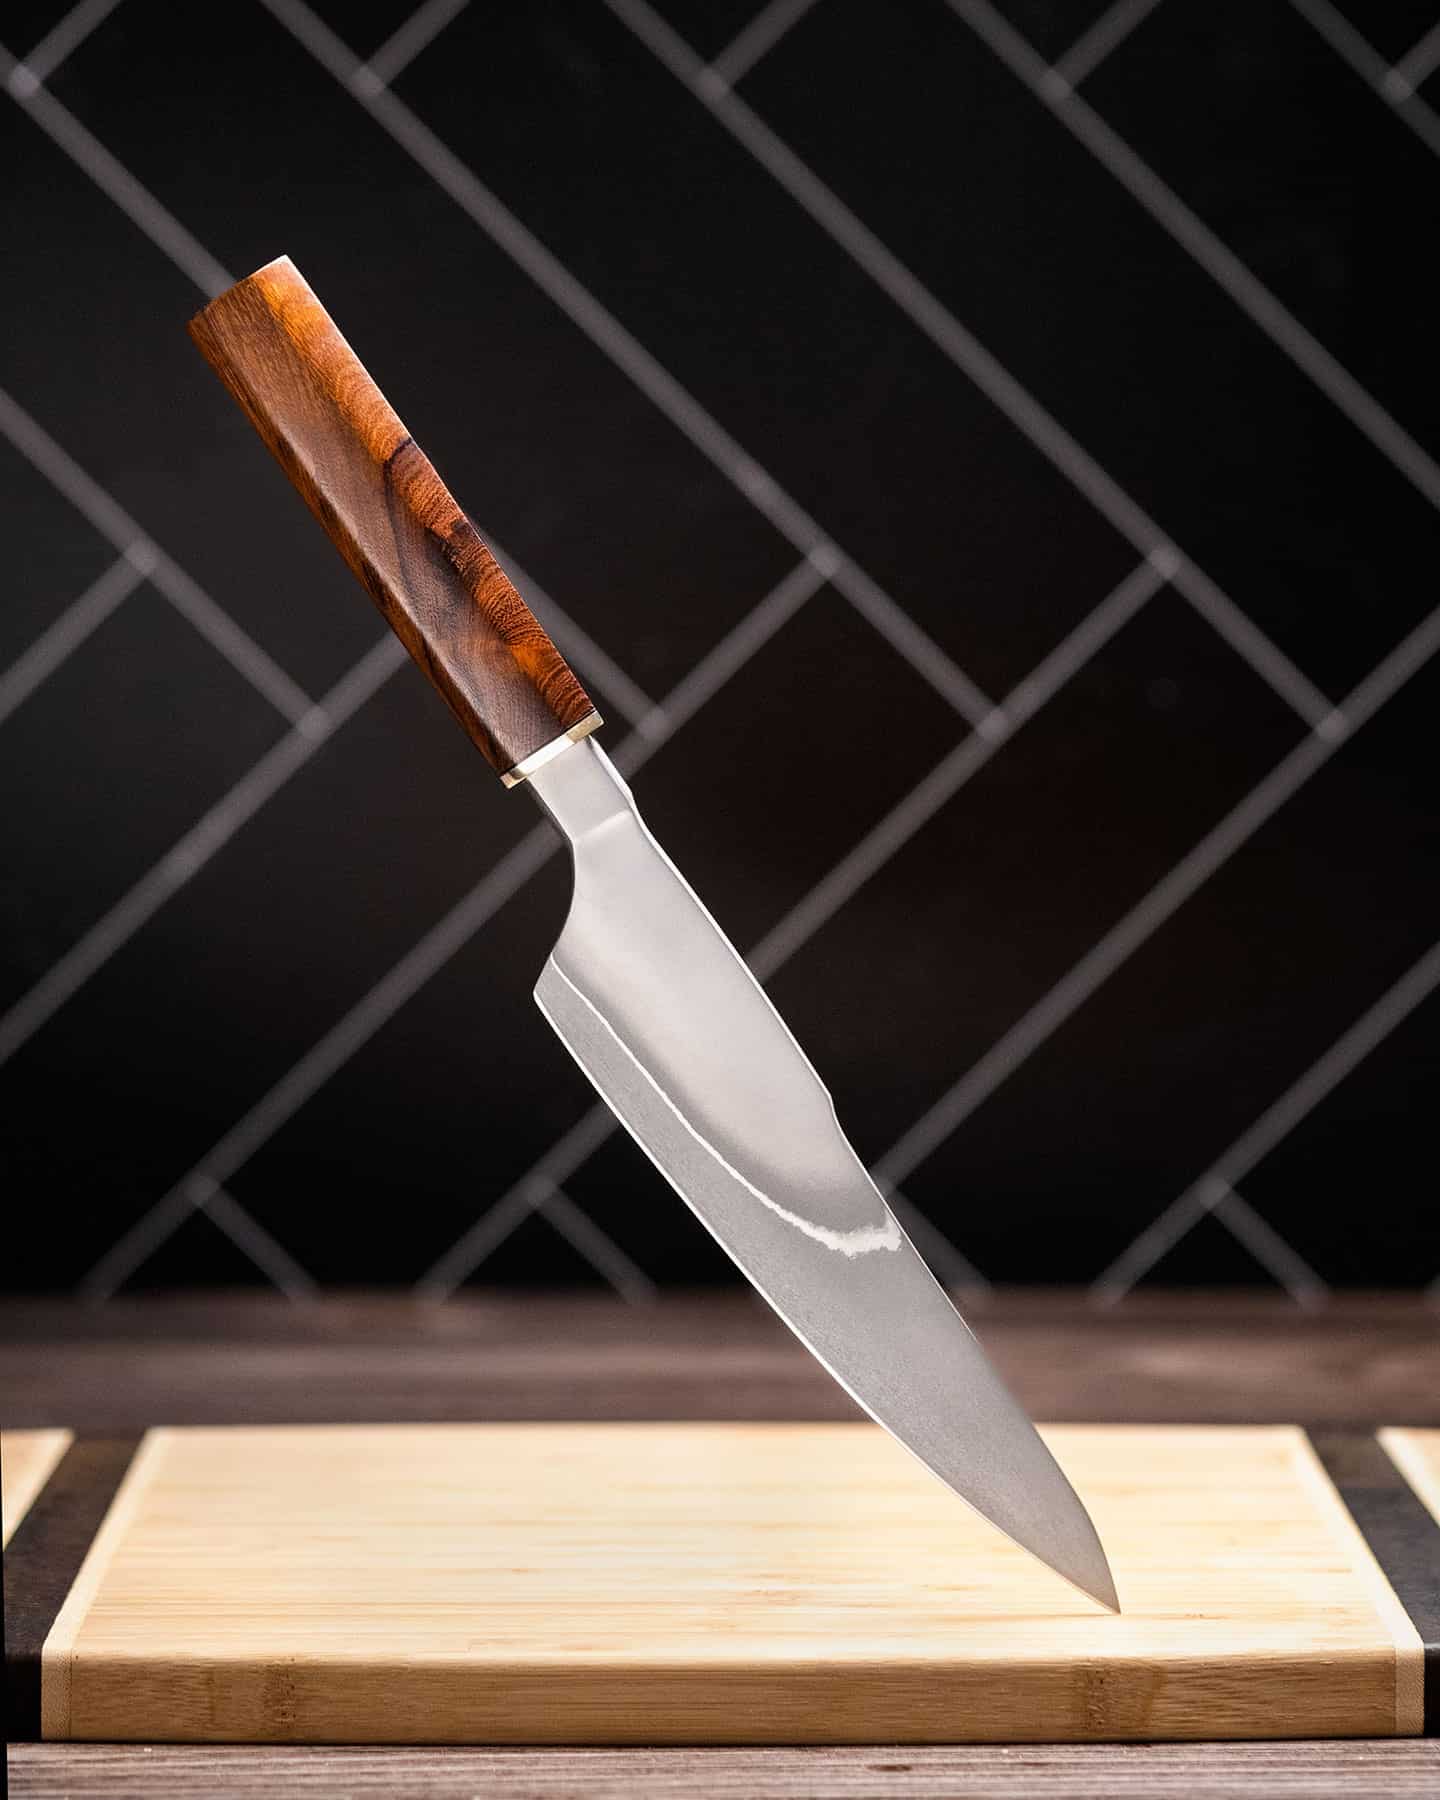 Bradford Chef's Knife Review